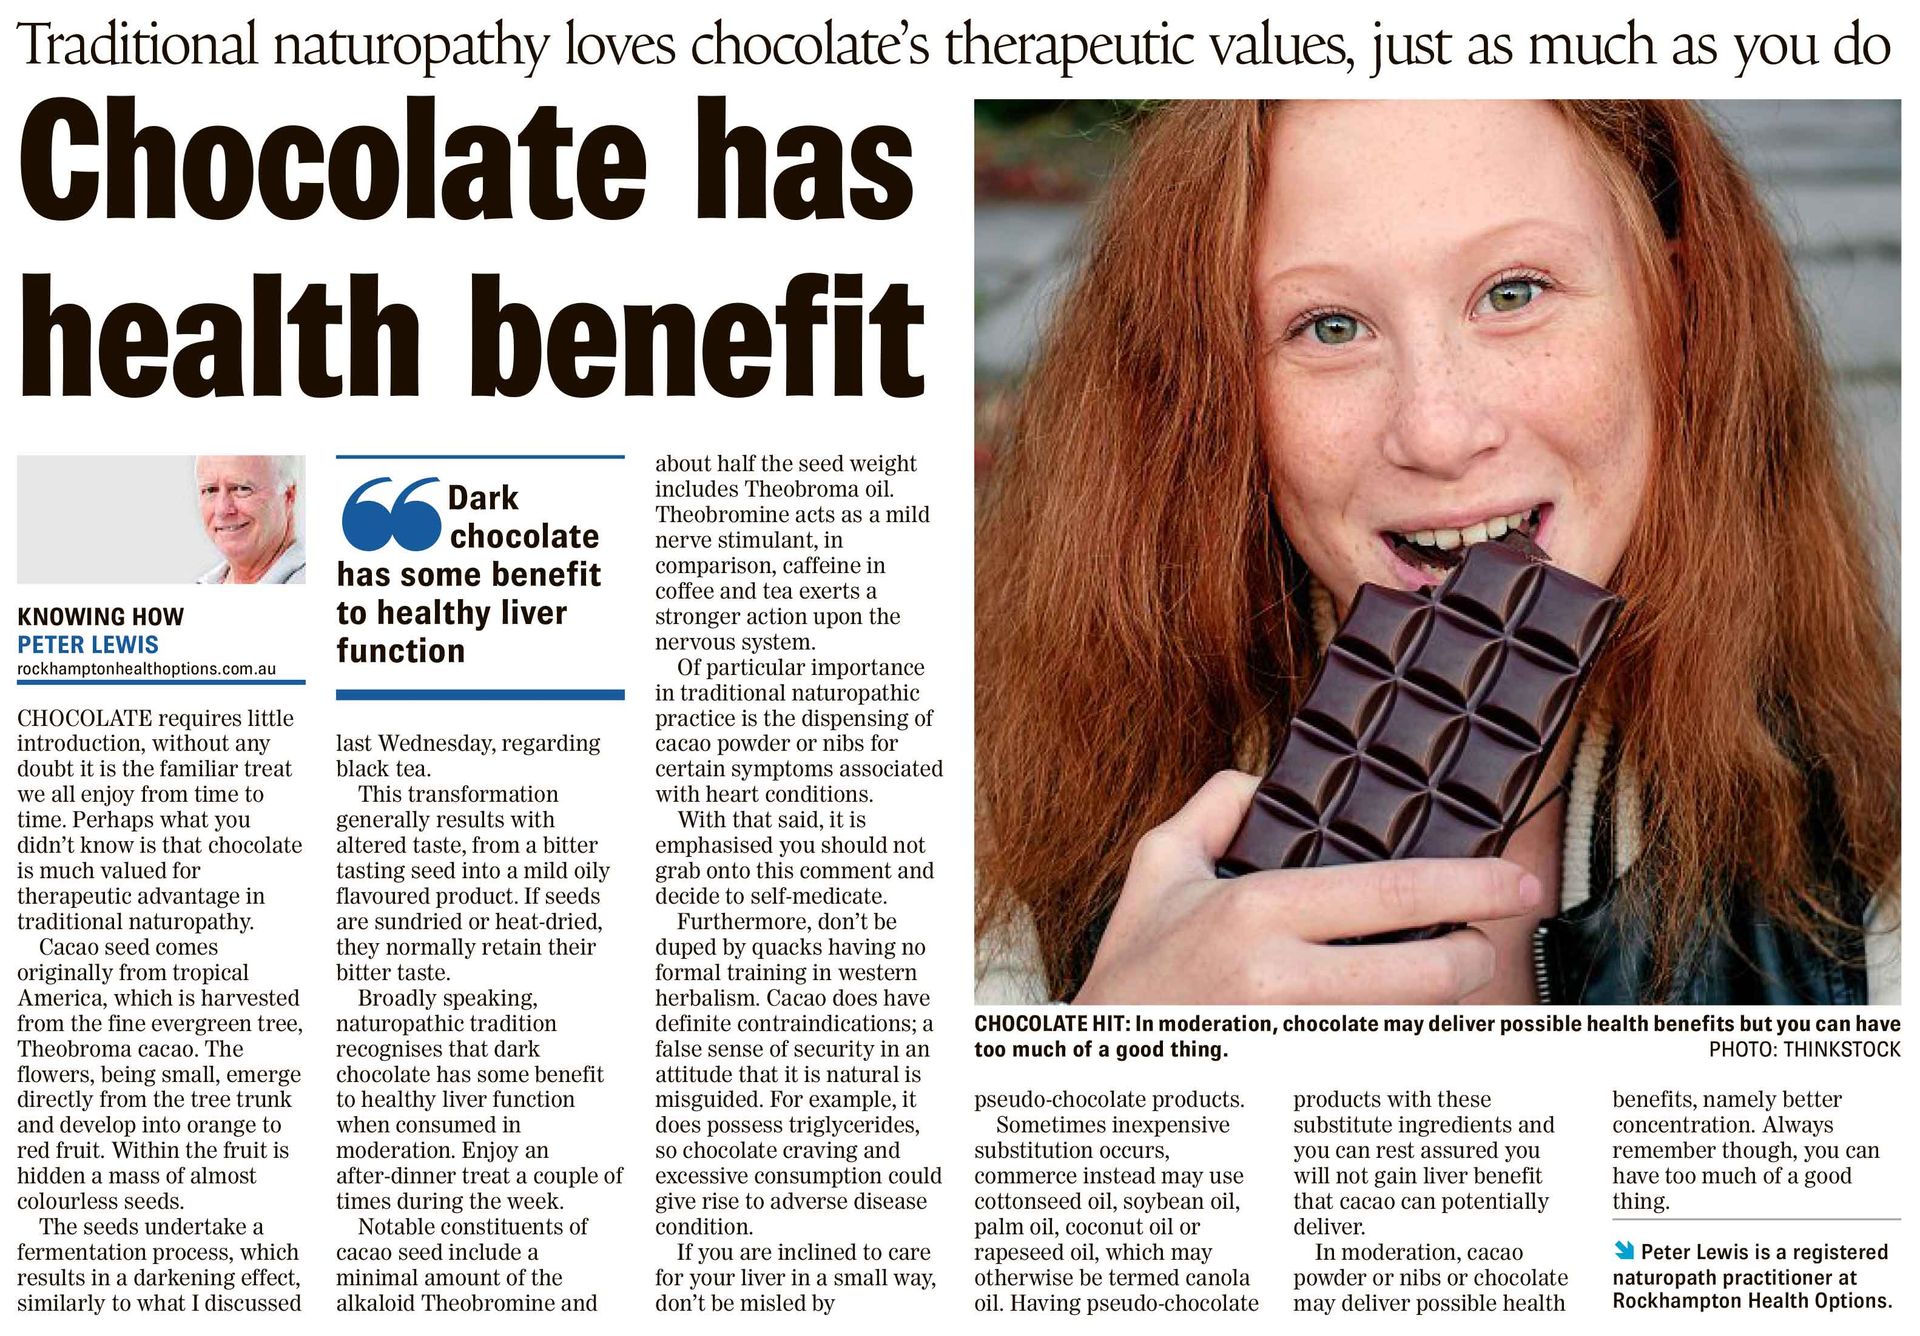 Article on Benefits of chocolate 